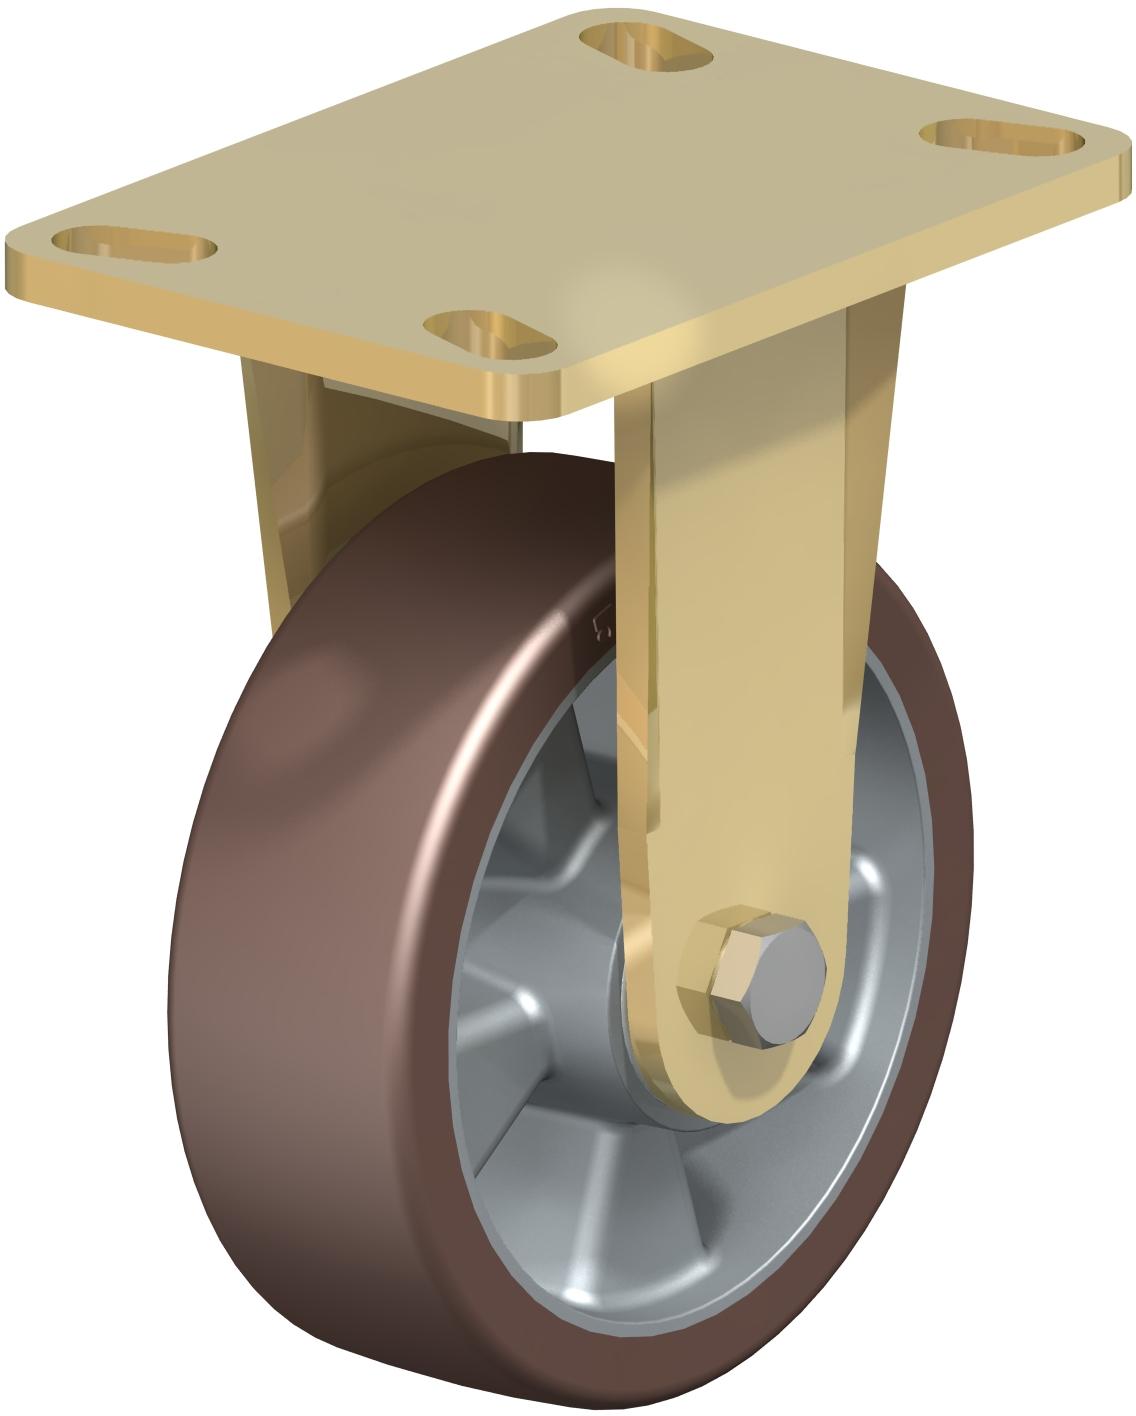 Extra Heavy Duty Top Plate Casters - Rigid, Ball Bearing, Blickle Besthane Brown Polyurethane Tread On Aluminum Core Wheel